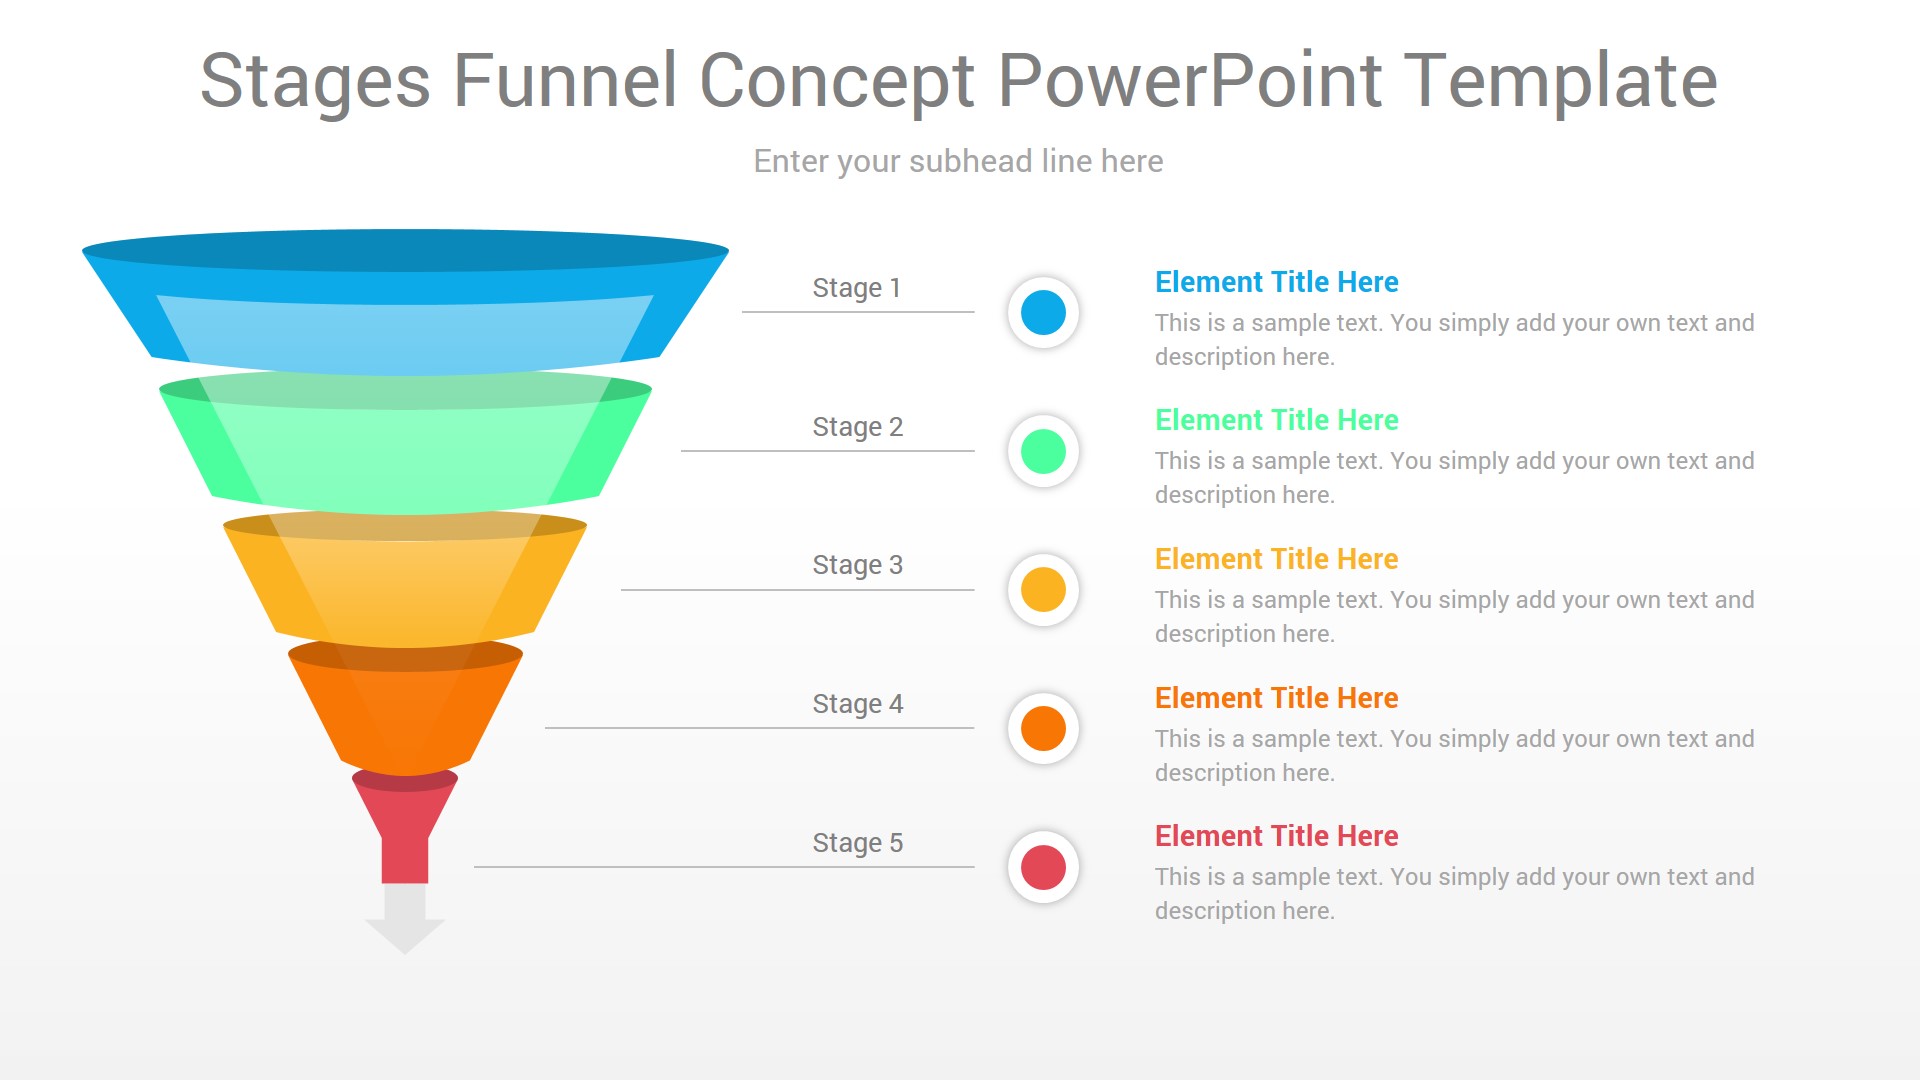 Stages Funnel Concept PowerPoint Template CiloArt